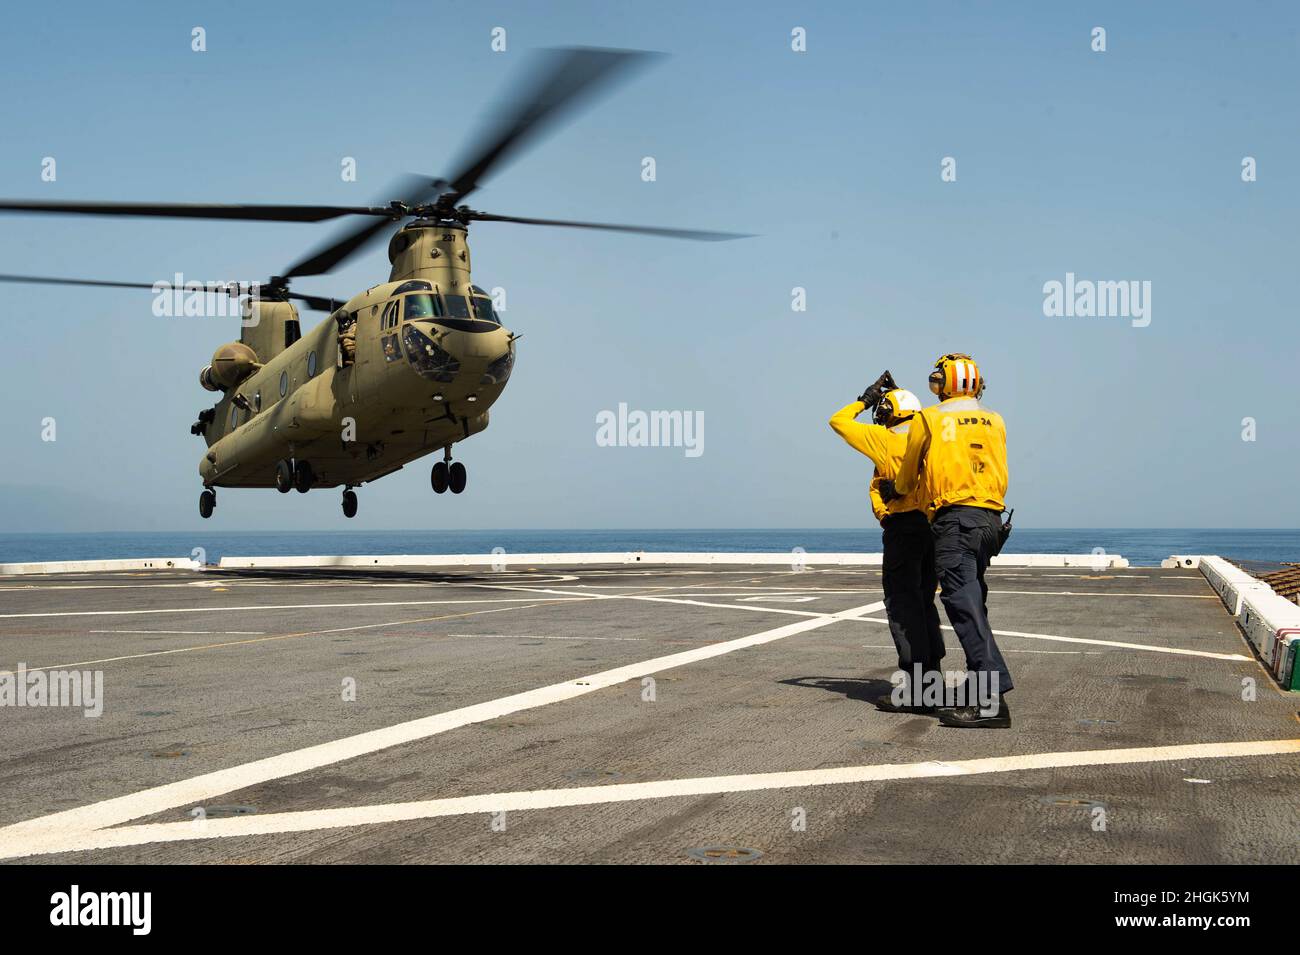 210828-N-MD802-1206  CARIBBEAN SEA -(Aug. 28, 2021) — A U.S Army CH-47 Chinook helicopter, assigned to Bravo Company, 1st Battalion, 228th Aviation Regiment conducts deck landing qualifications aboard the San Antonio-class amphibious transport dock ship USS Arlington (LPD 24), Aug. 28, 2021. Arlington is deployed to U.S. Naval Forces Southern Command/U.S. 4th Fleet to support humanitarian assistance and disaster relief (HADR) efforts in Haiti following a 7.2-magnitude earthquake on Aug. 14, 2021. Stock Photo